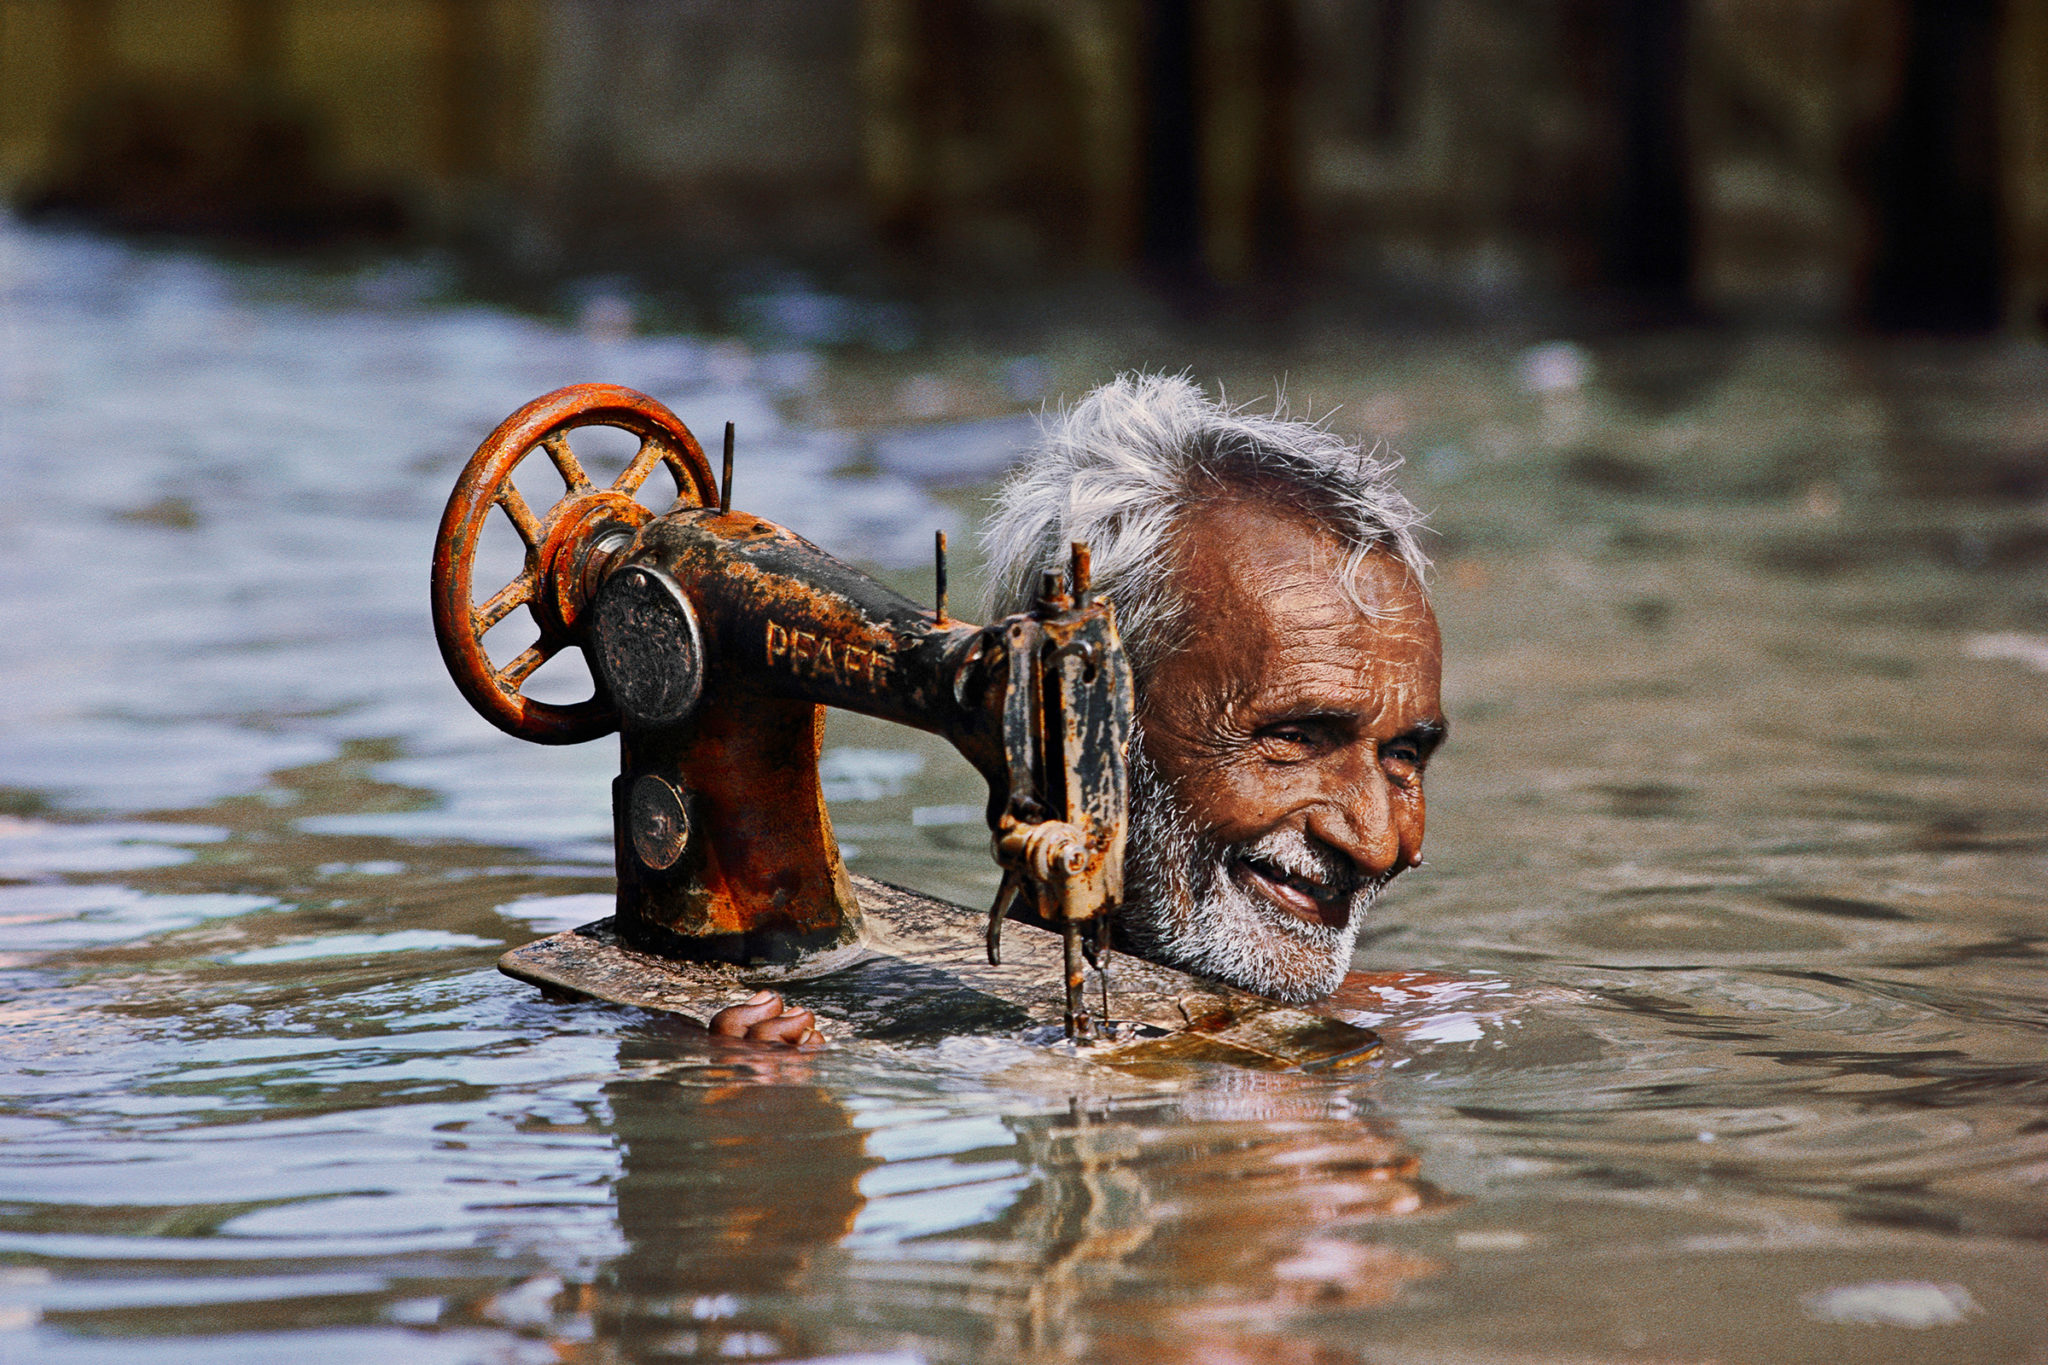 STUNNING IMAGES OF INDIA SHOT BY STEVE MCCURRY